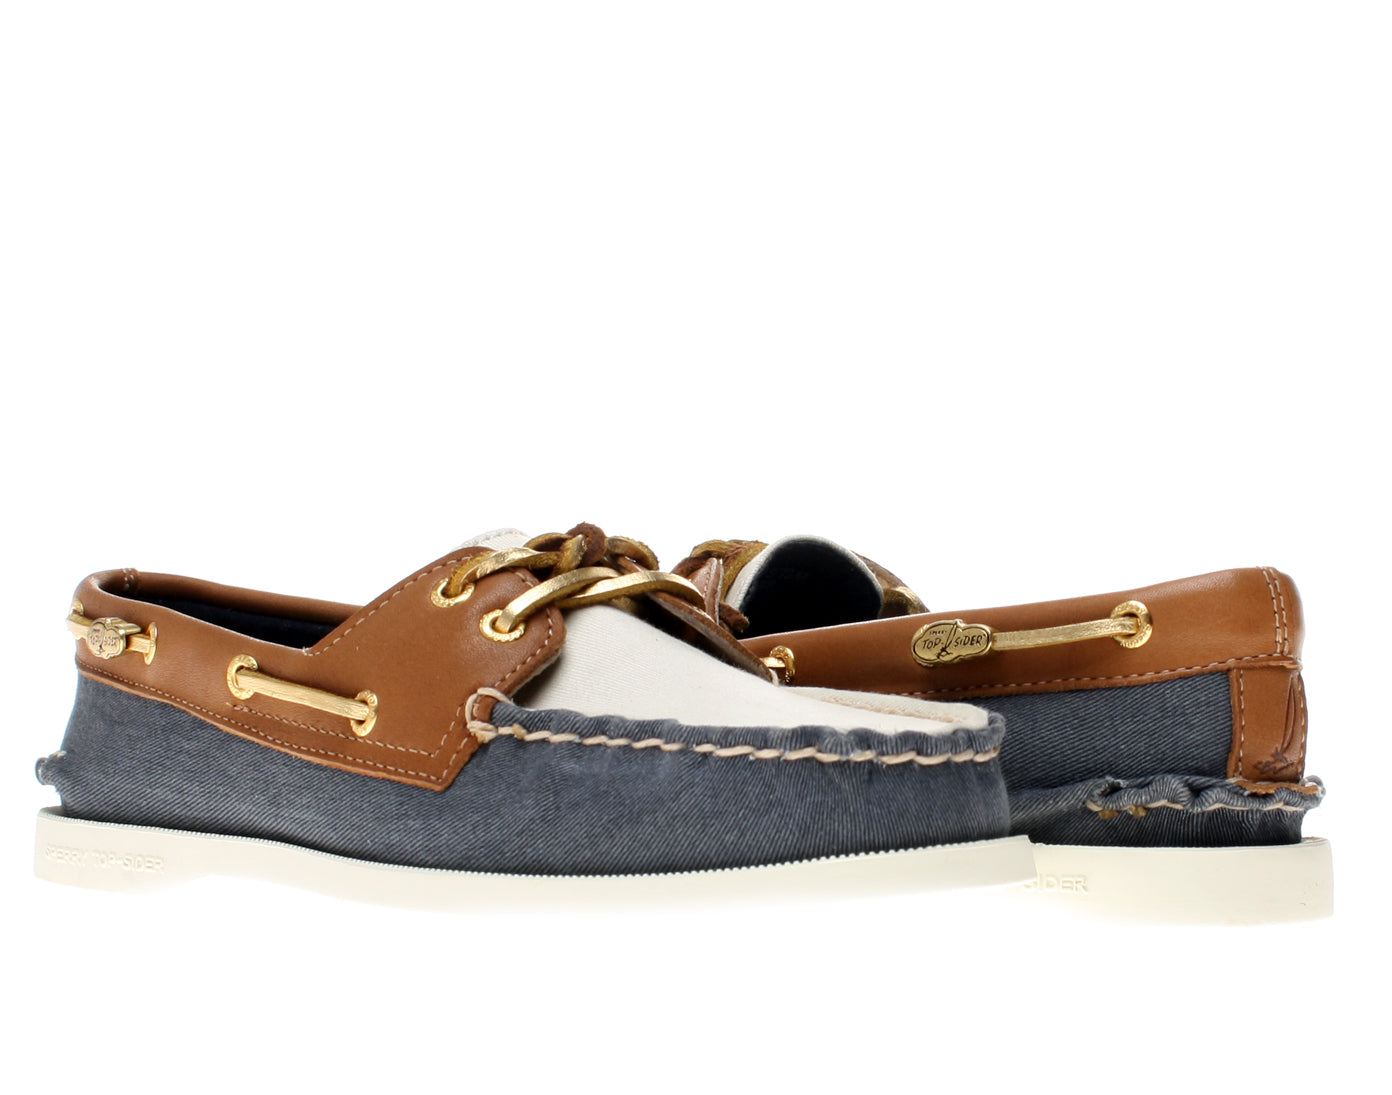 Sperry Top Sider Cloud Logo Women's Boat Shoes